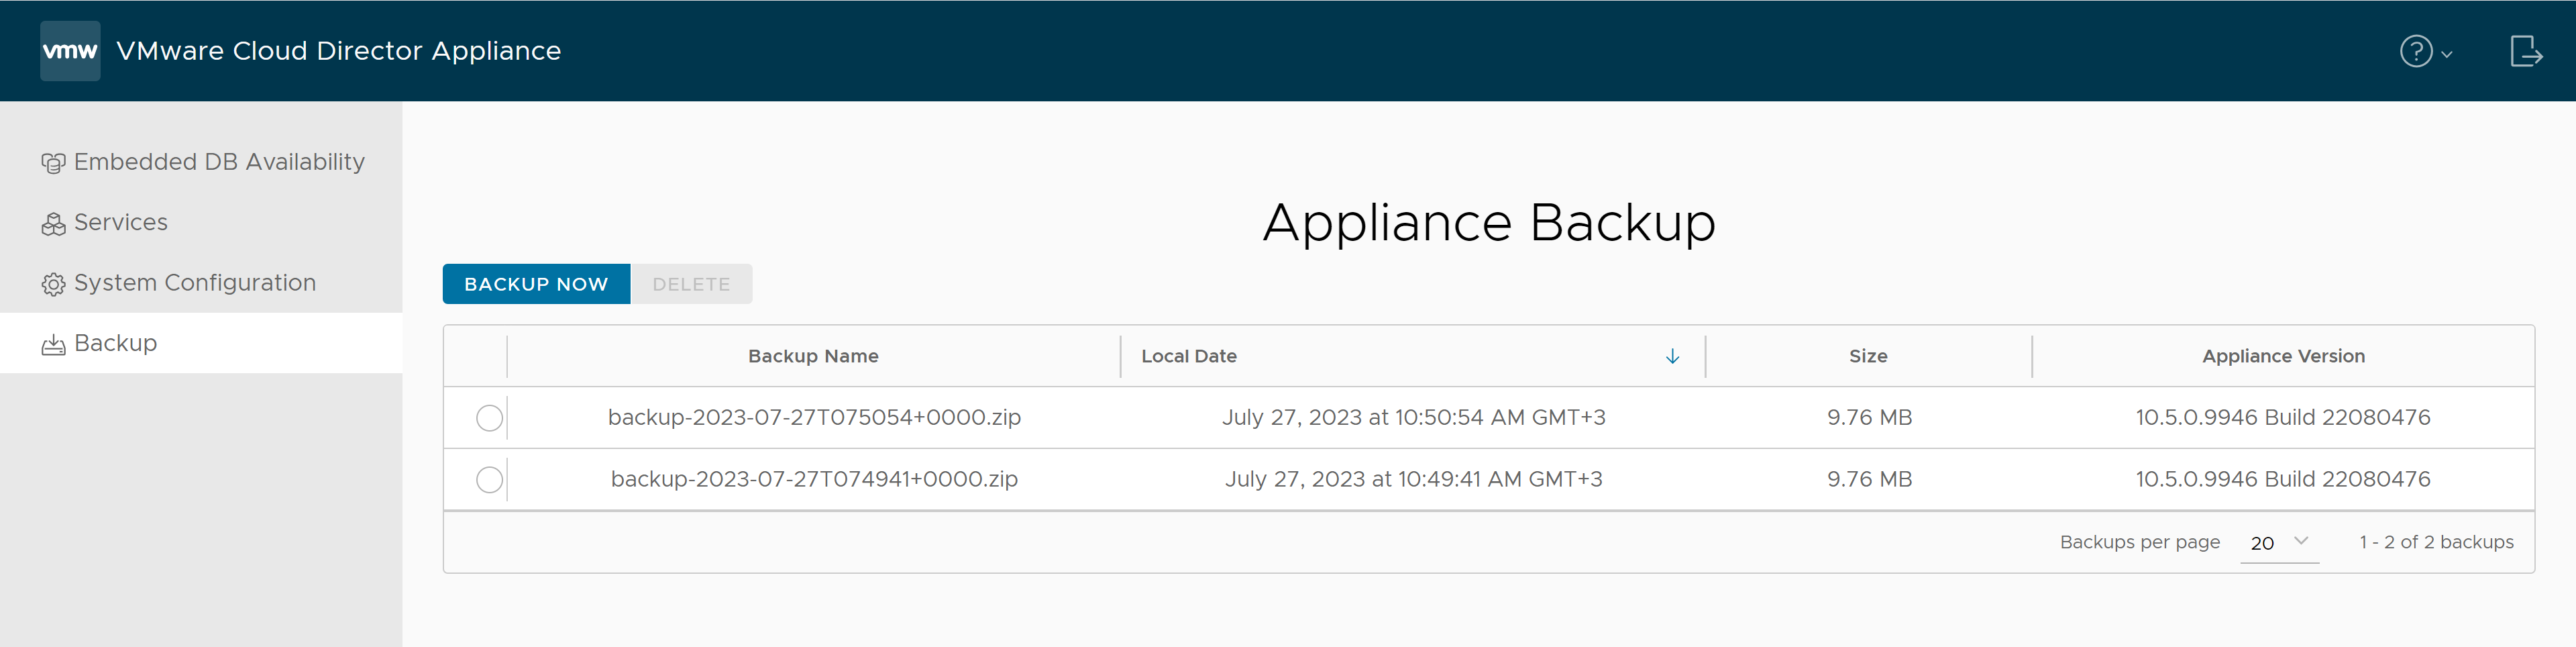 On the Backup tab of the VMware Cloud Director appliance management UI, you can find details about all existing backups.